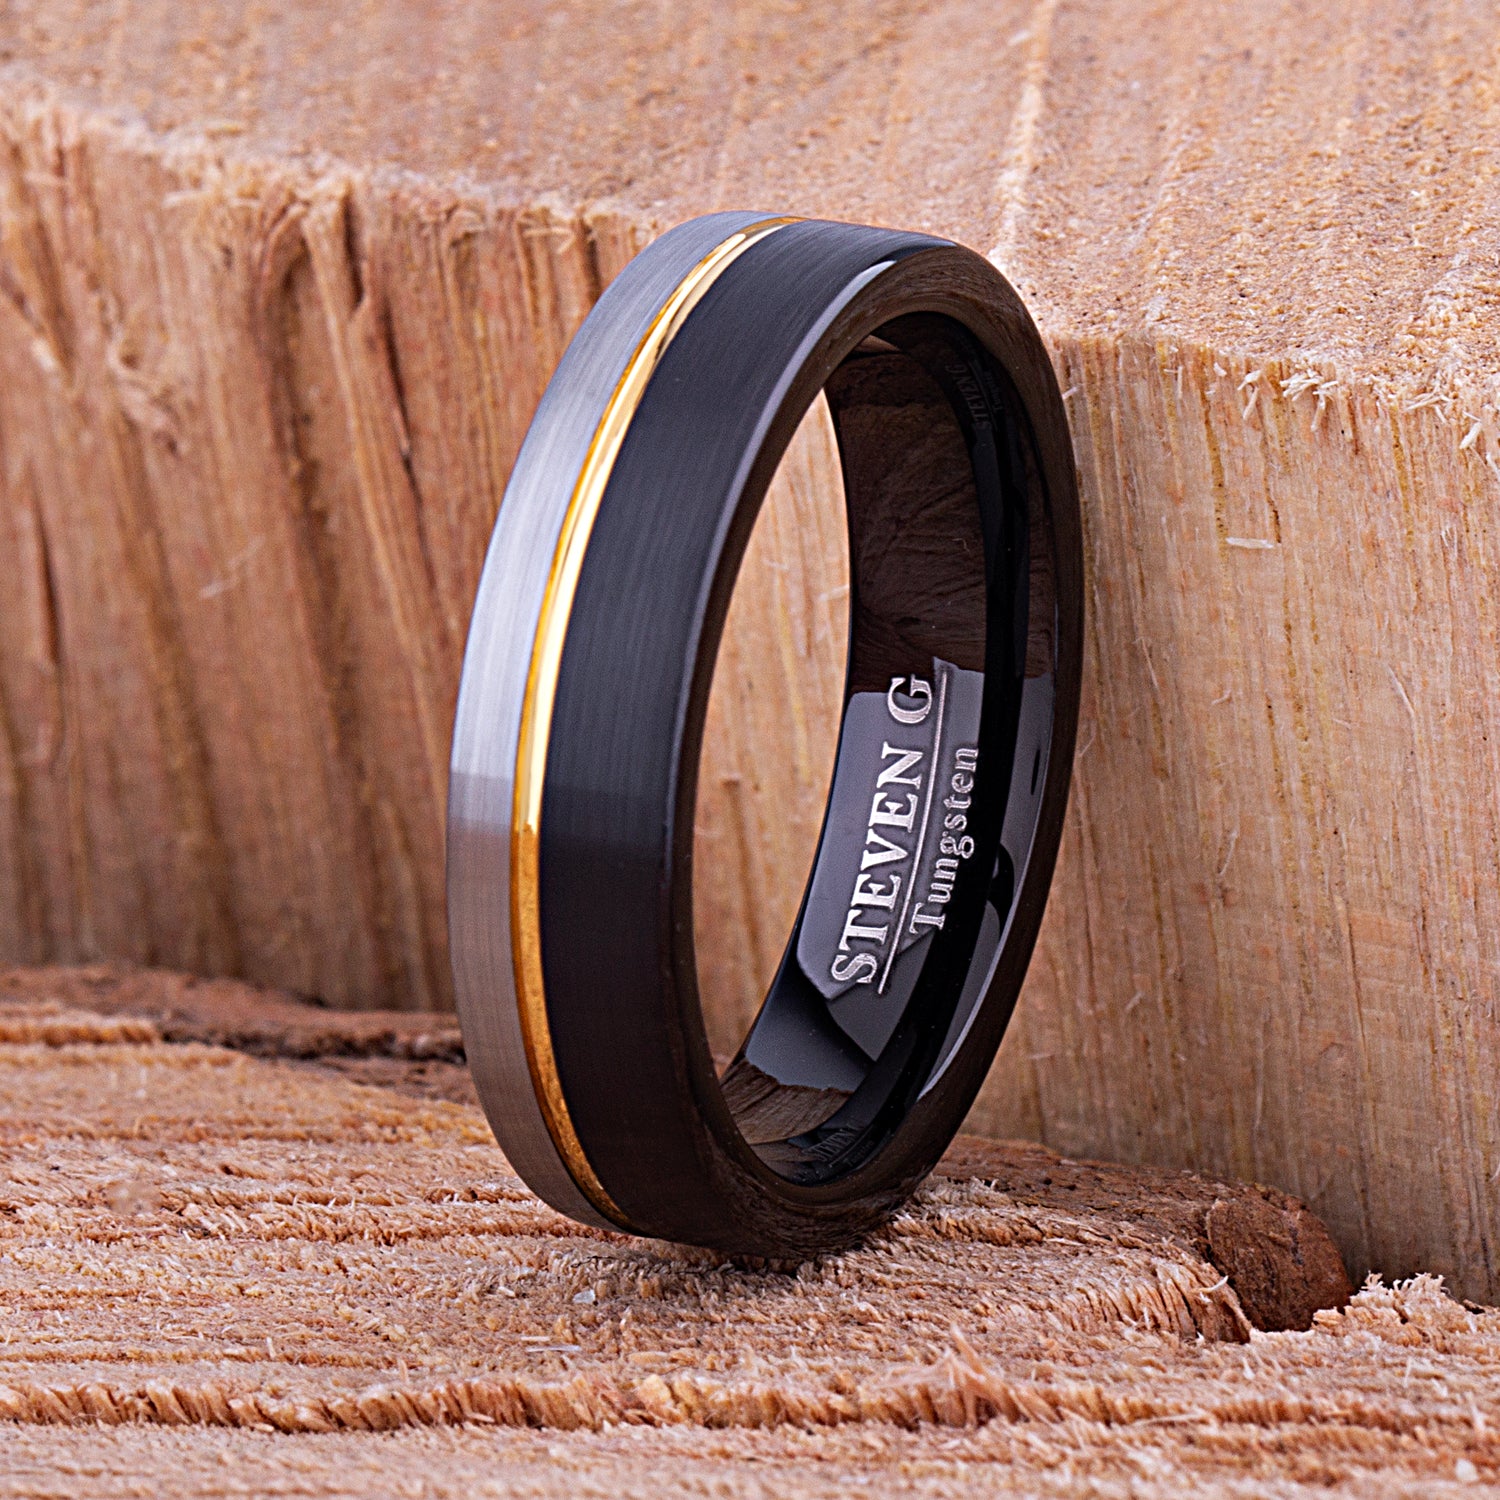 Gold Tungsten Ring Black Gunmetal Male Wedding Band Unique Men Comfort Fit  8MM Sizes 5 to 15 Circle Husband Anniversary Special Gift Idea - Etsy | Gold  tungsten ring, Black wedding rings, Black rings